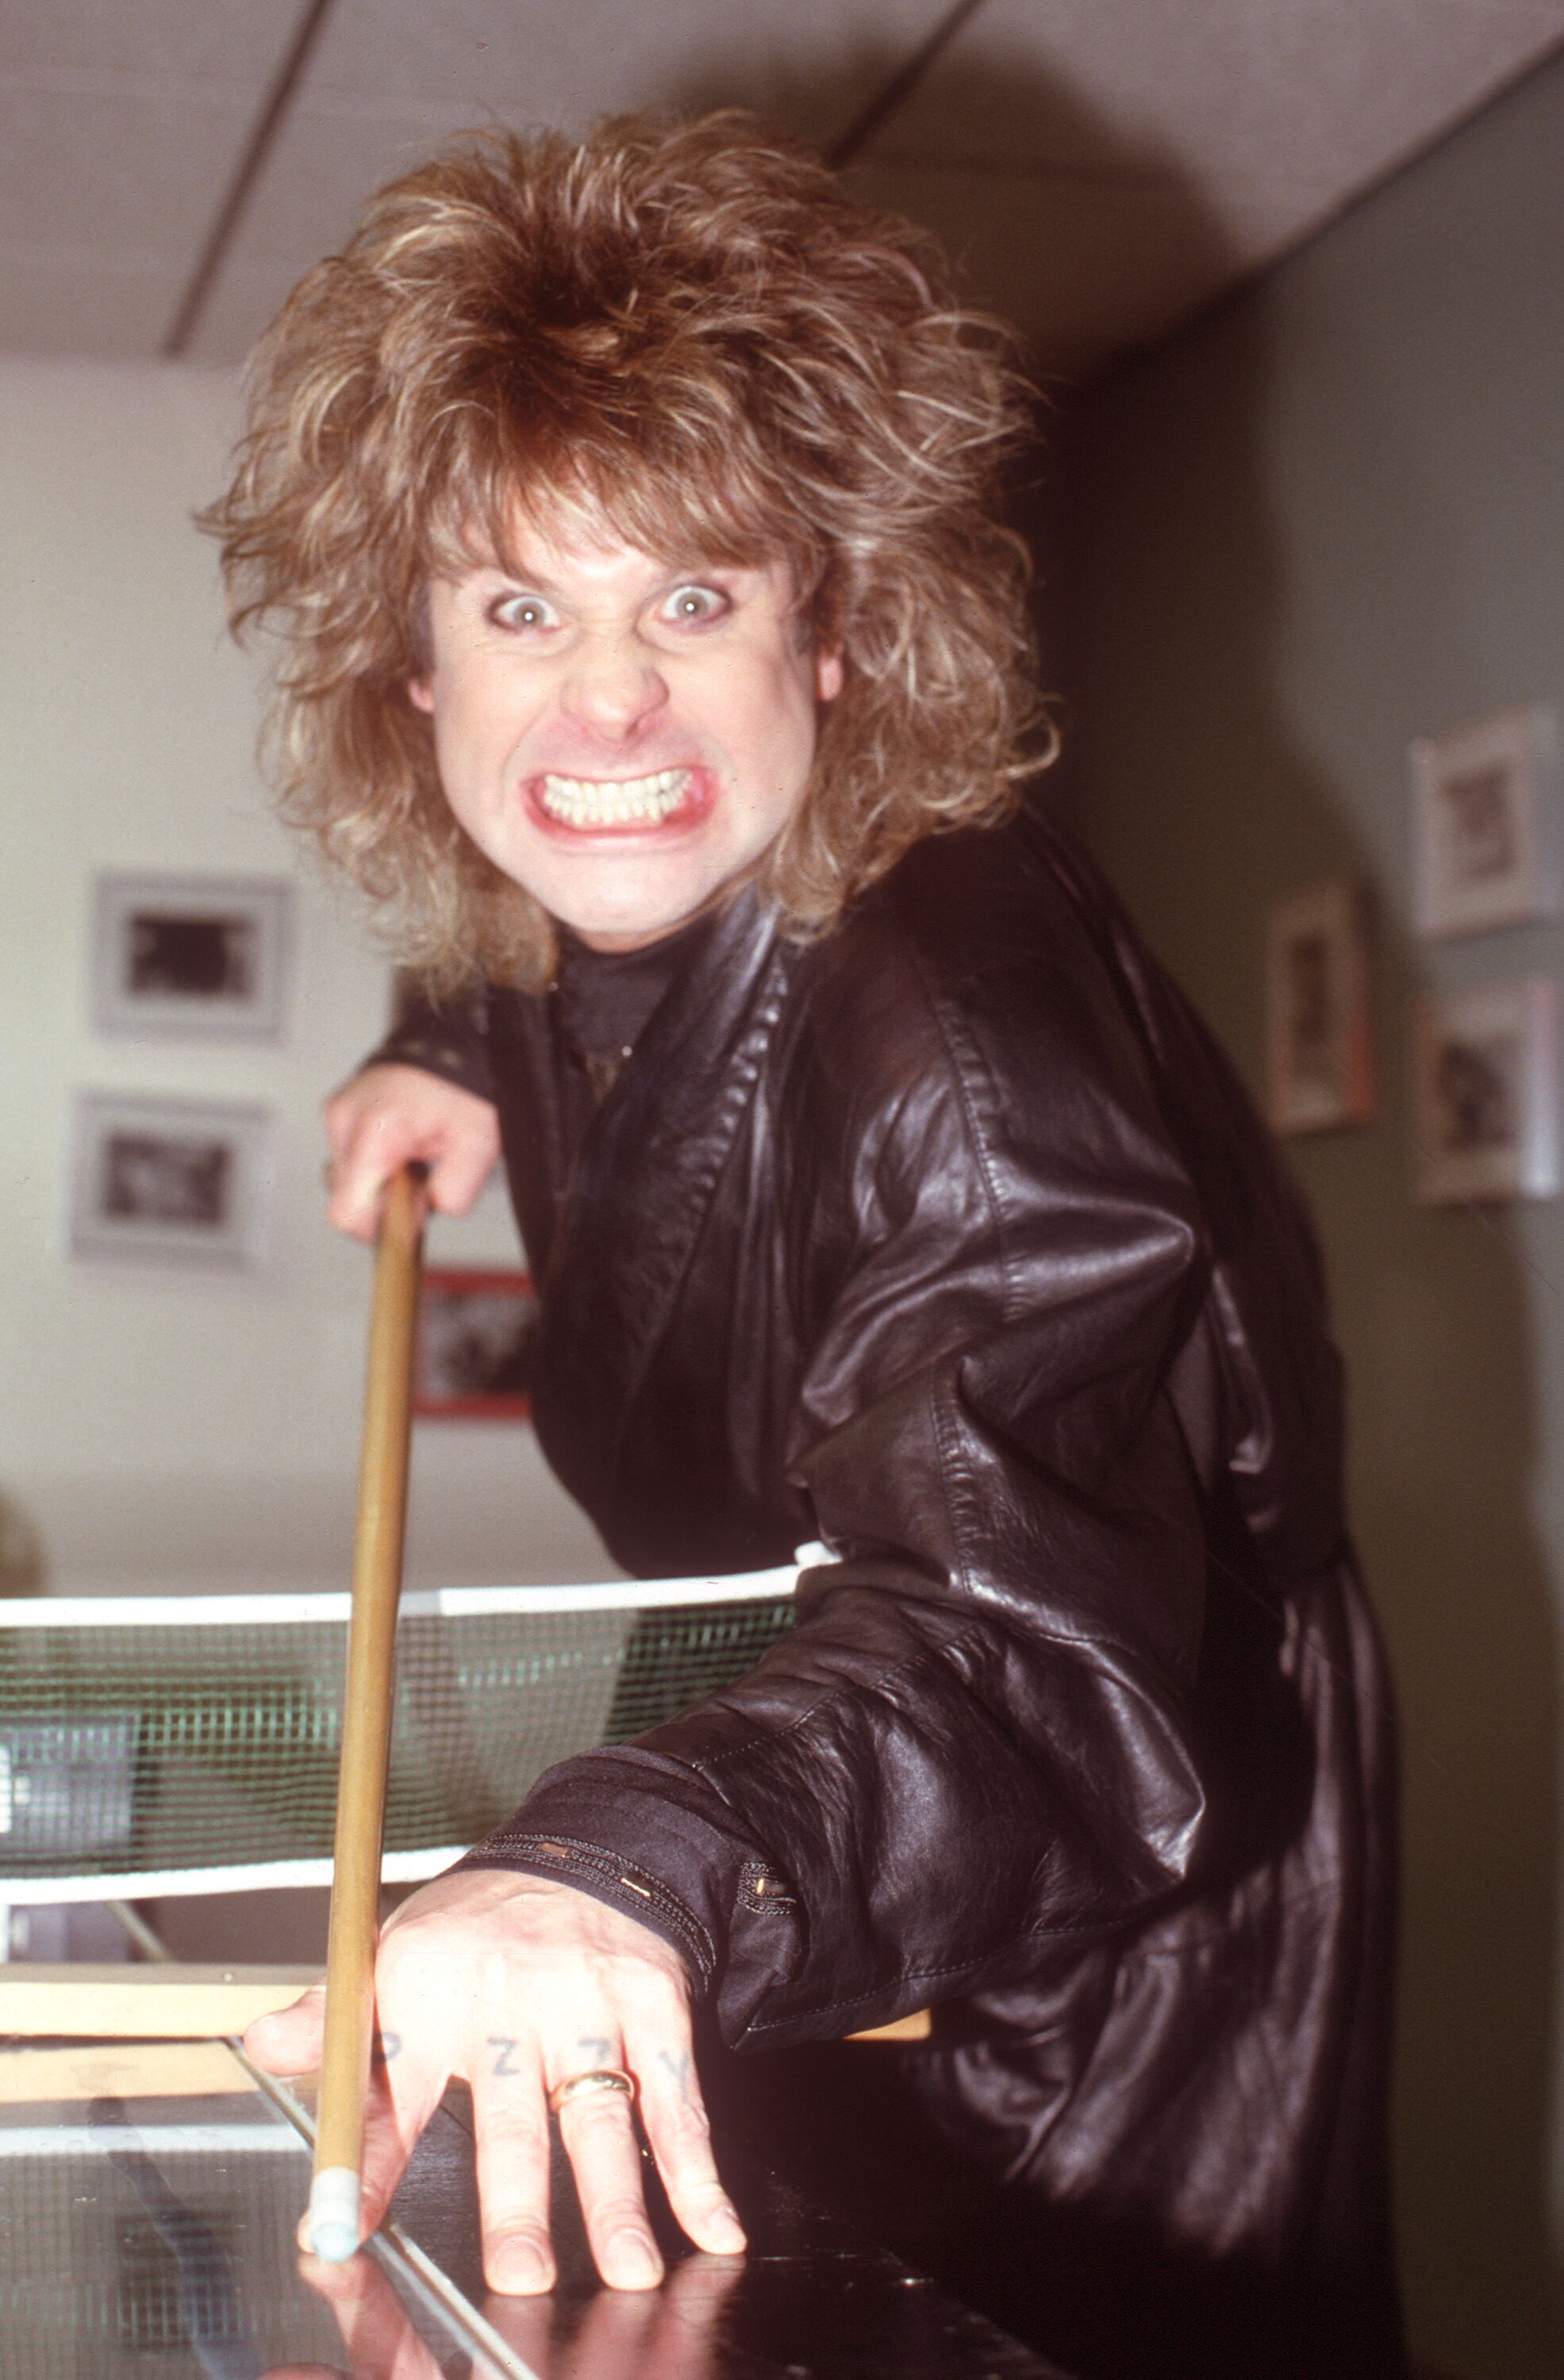  Ozzy Osbourne in the late 80s | Source: Getty Images